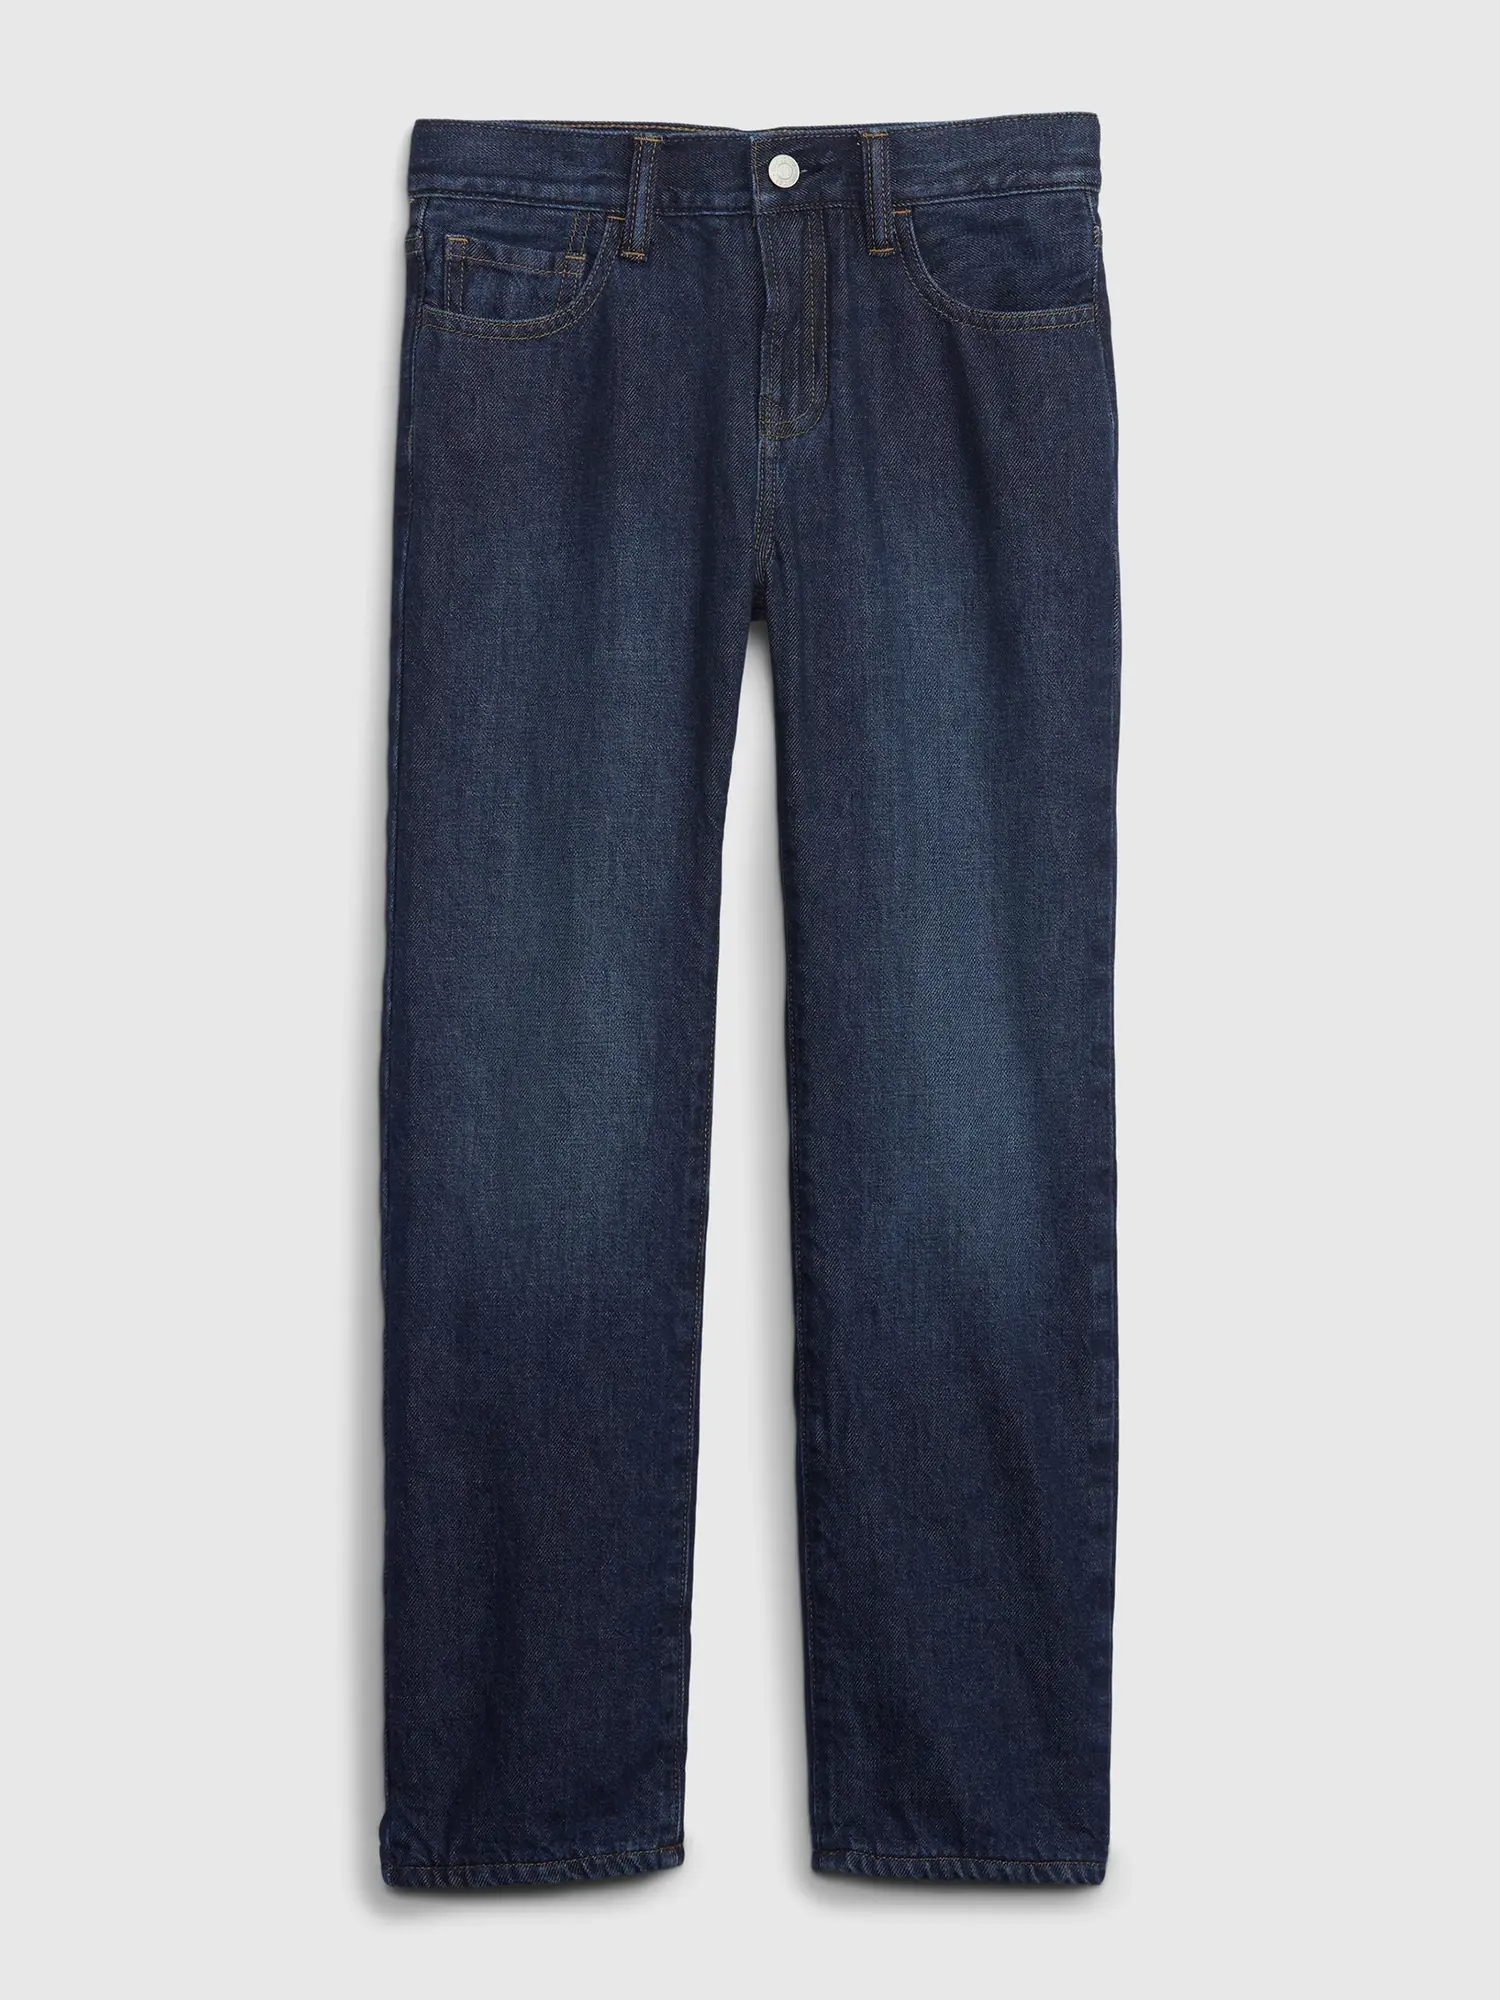 Gap Kids Fleece-Lined Original Fit Jeans with Washwell blue. 1